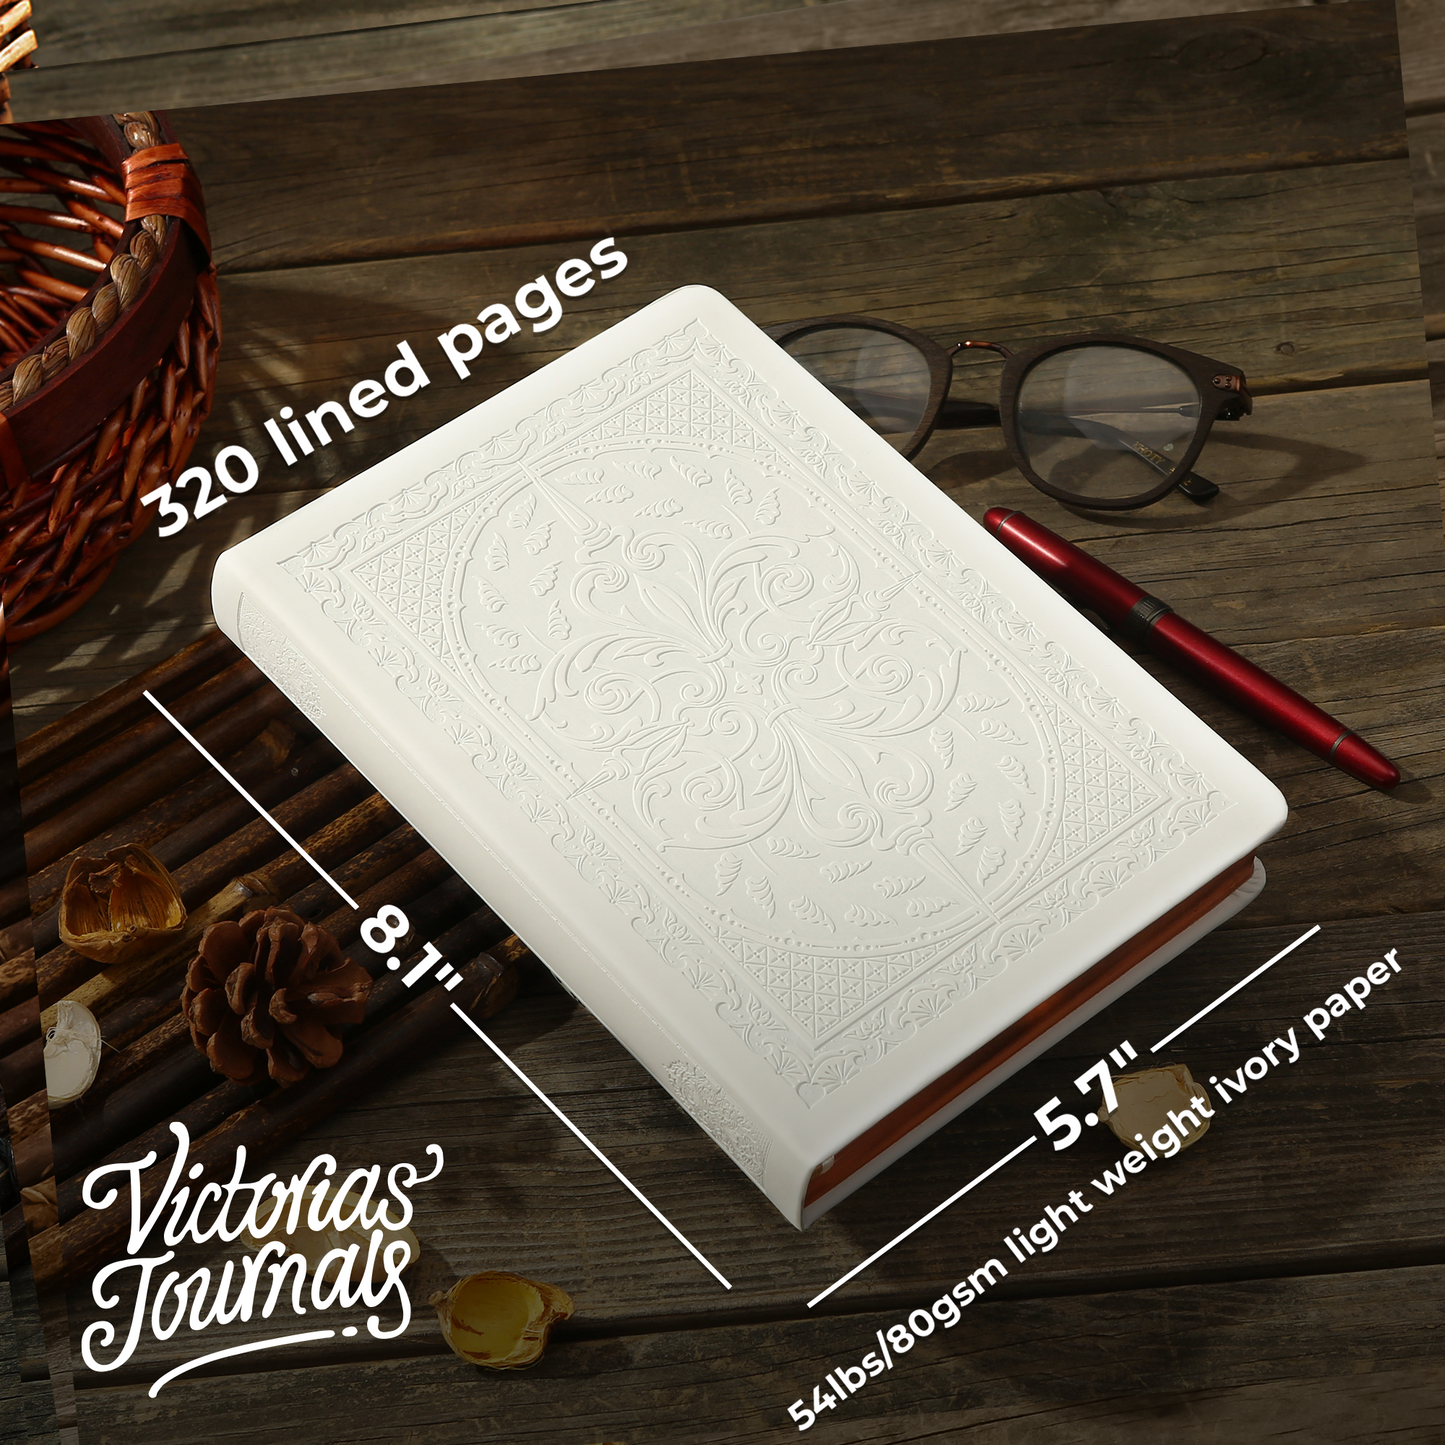 Victoria's Journals Vintage Style Diary for Men and Women – Use it for Writing, Note Taking, Poetry, Travel, Gratitude, Mindfulness, Self-Help, Daily Affirmations or a Prayer Journal 320p. (White)